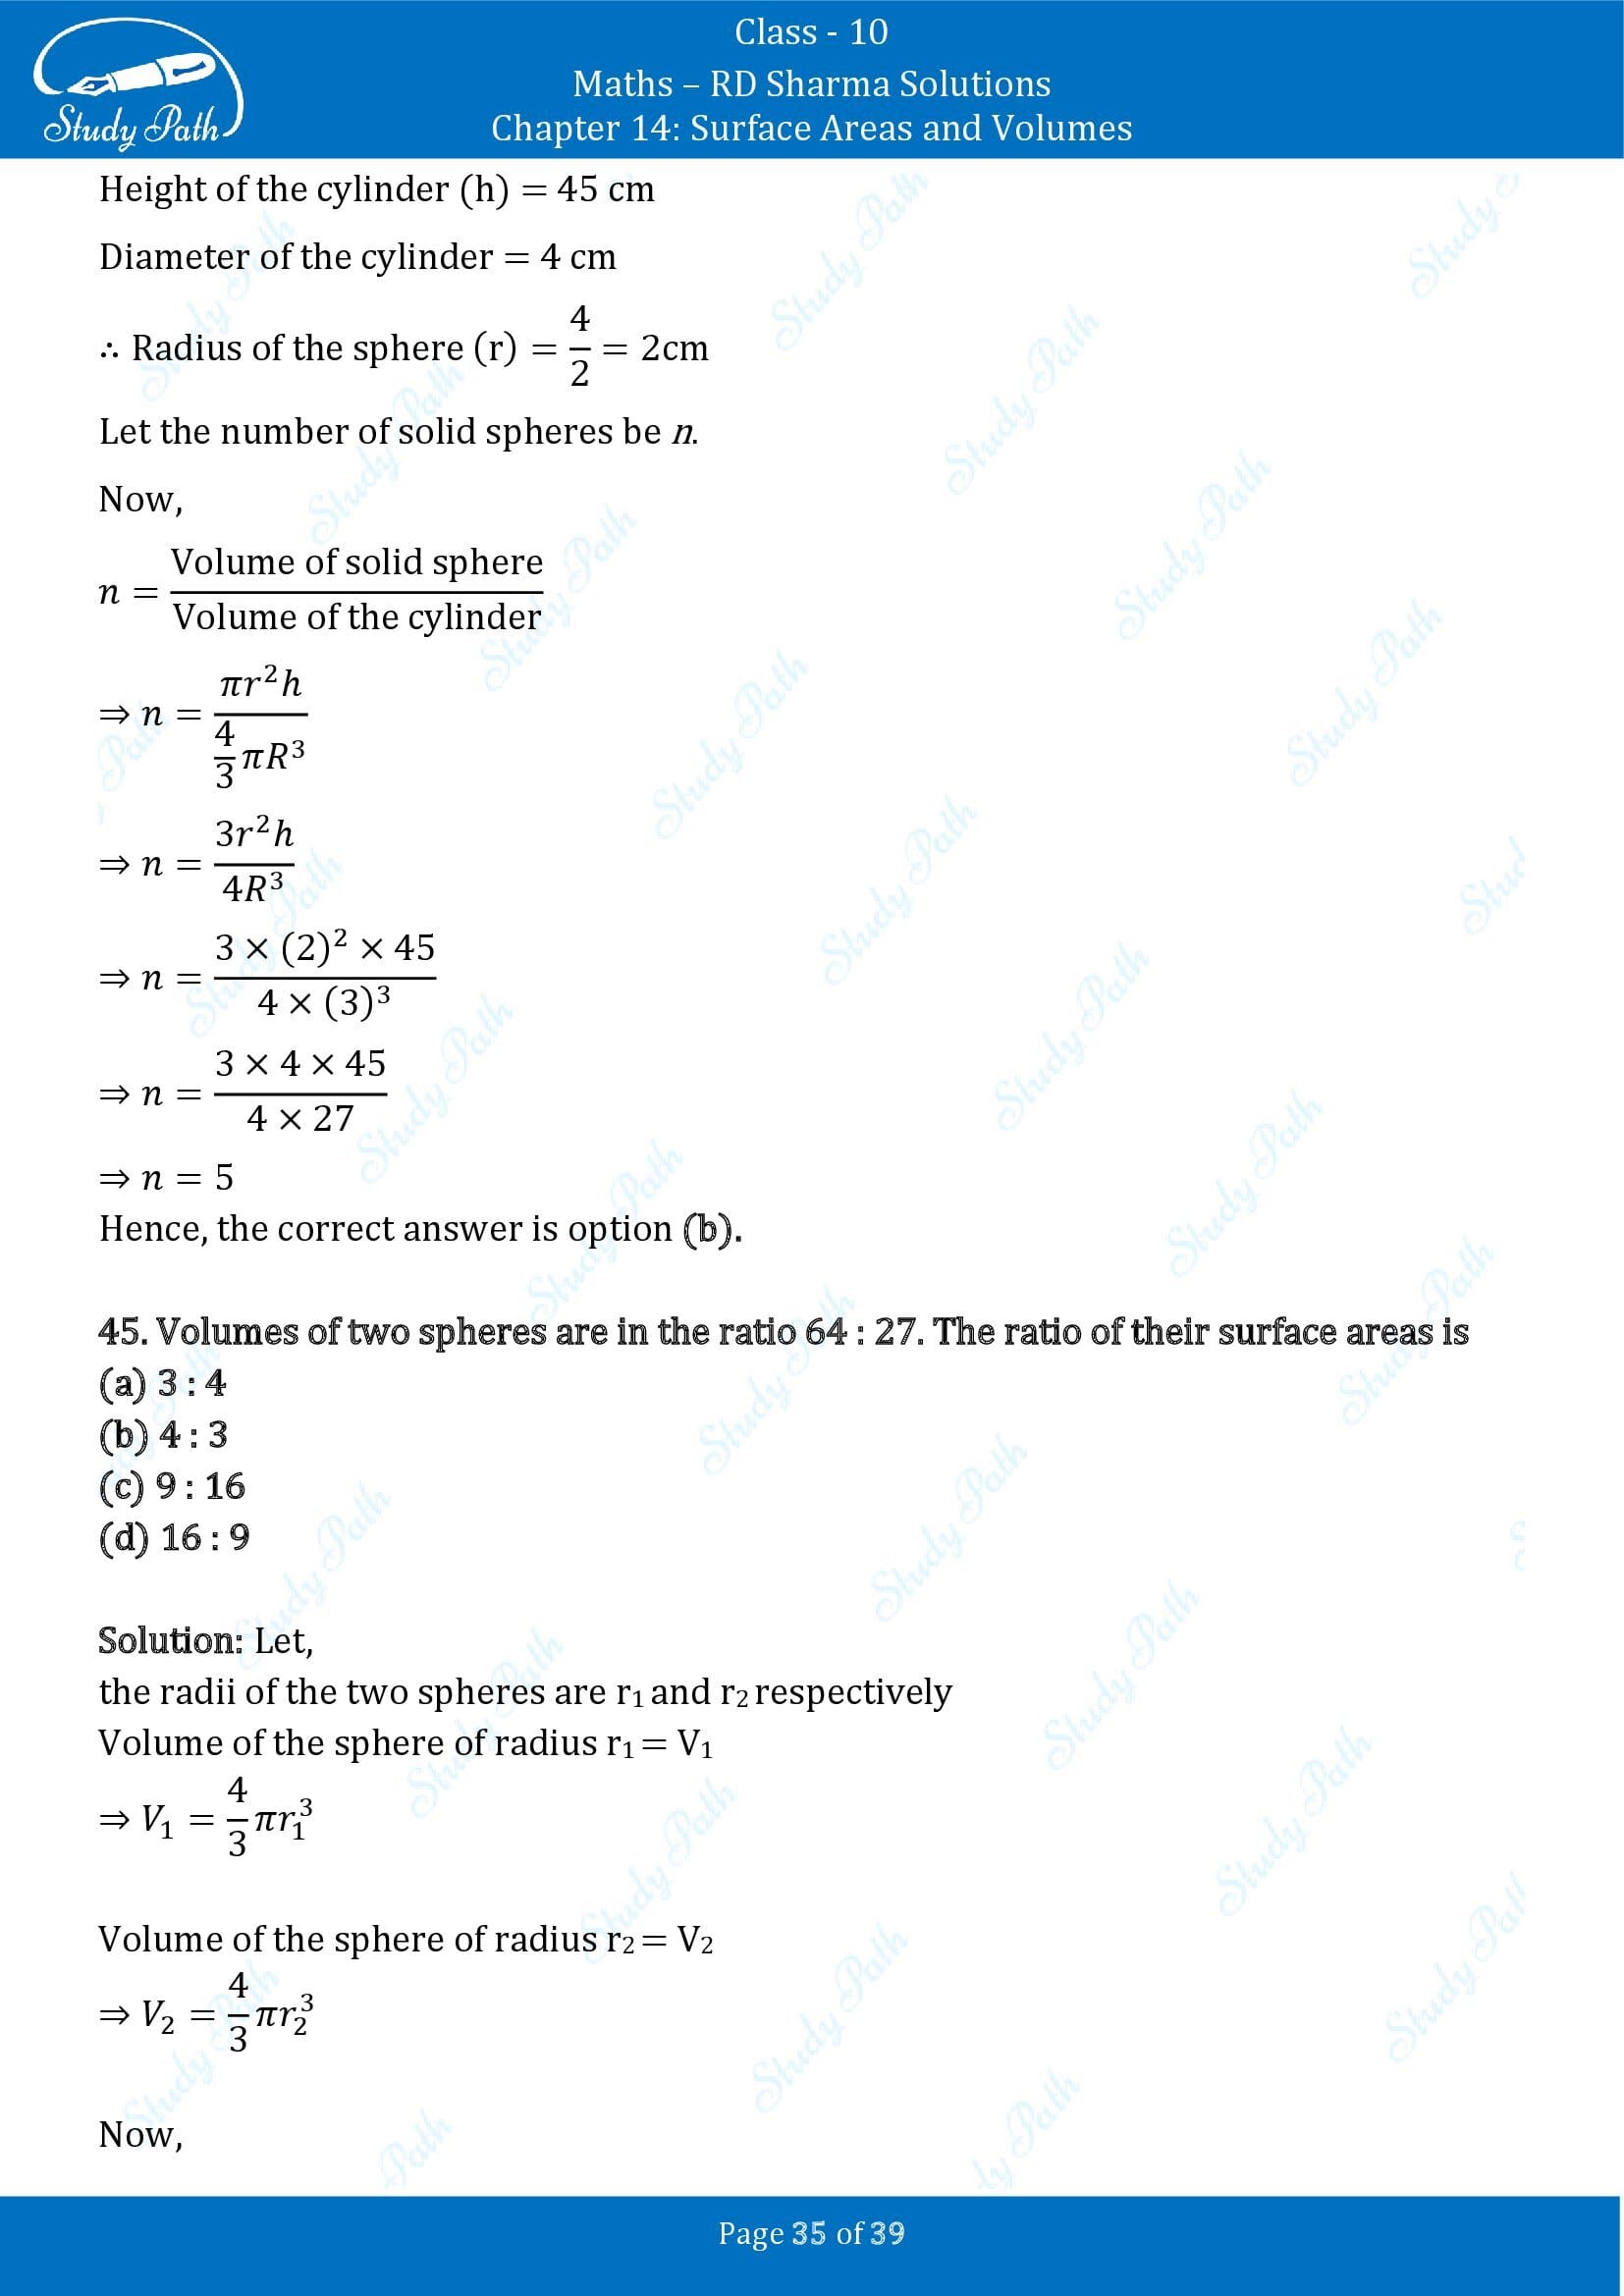 RD Sharma Solutions Class 10 Chapter 14 Surface Areas and Volumes Multiple Choice Question MCQs 00035